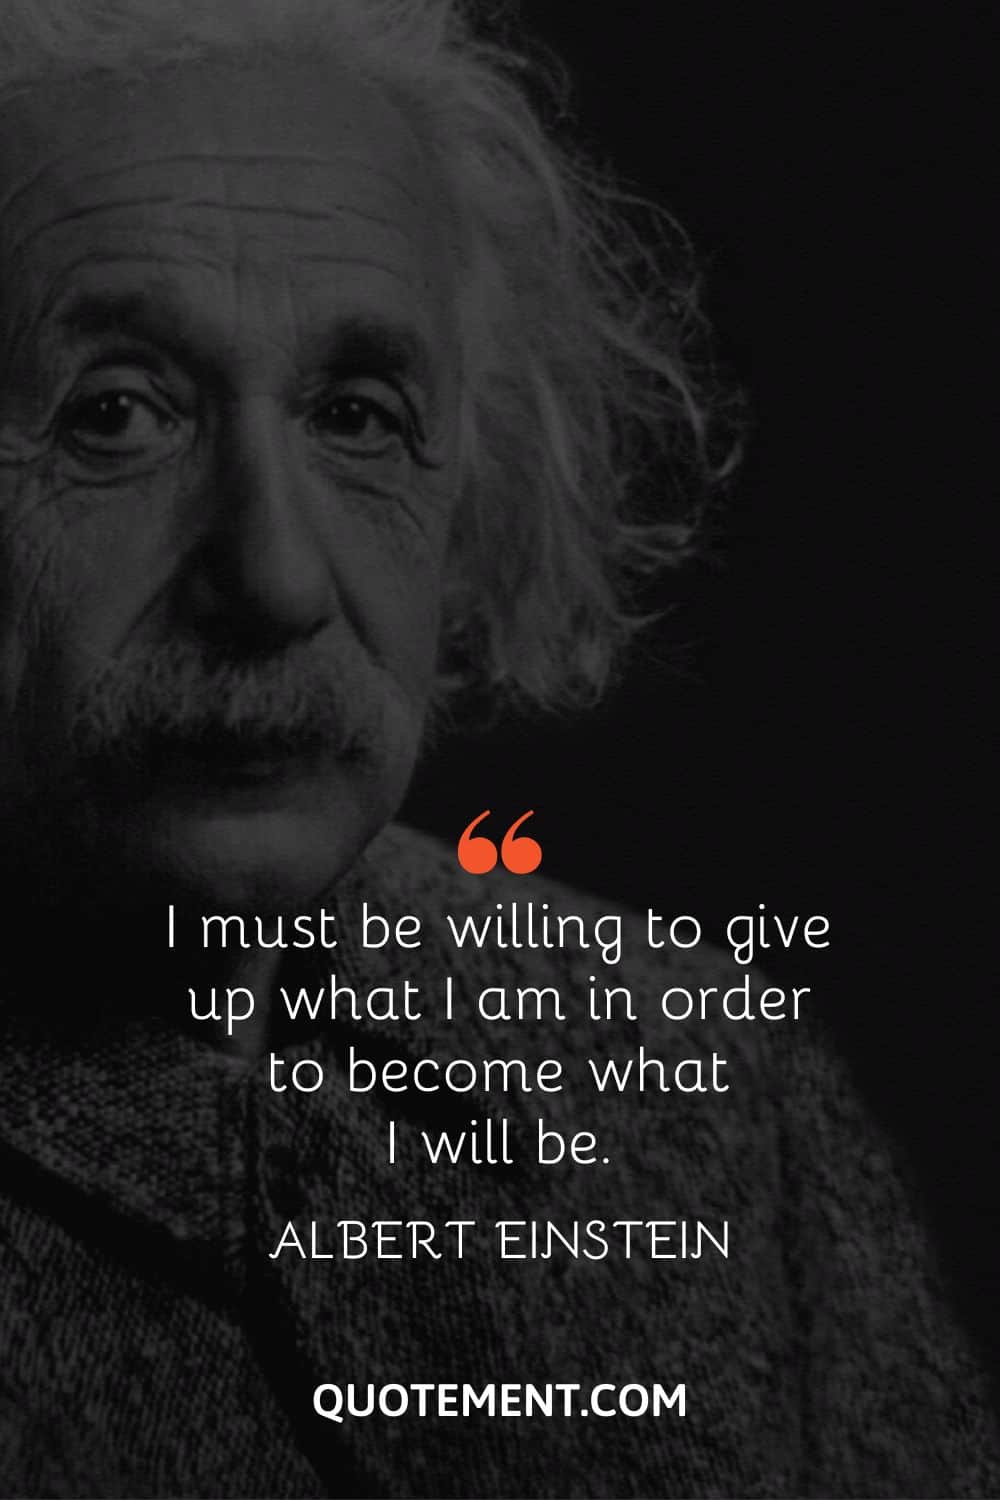 I must be willing to give up what I am in order to become what I will be